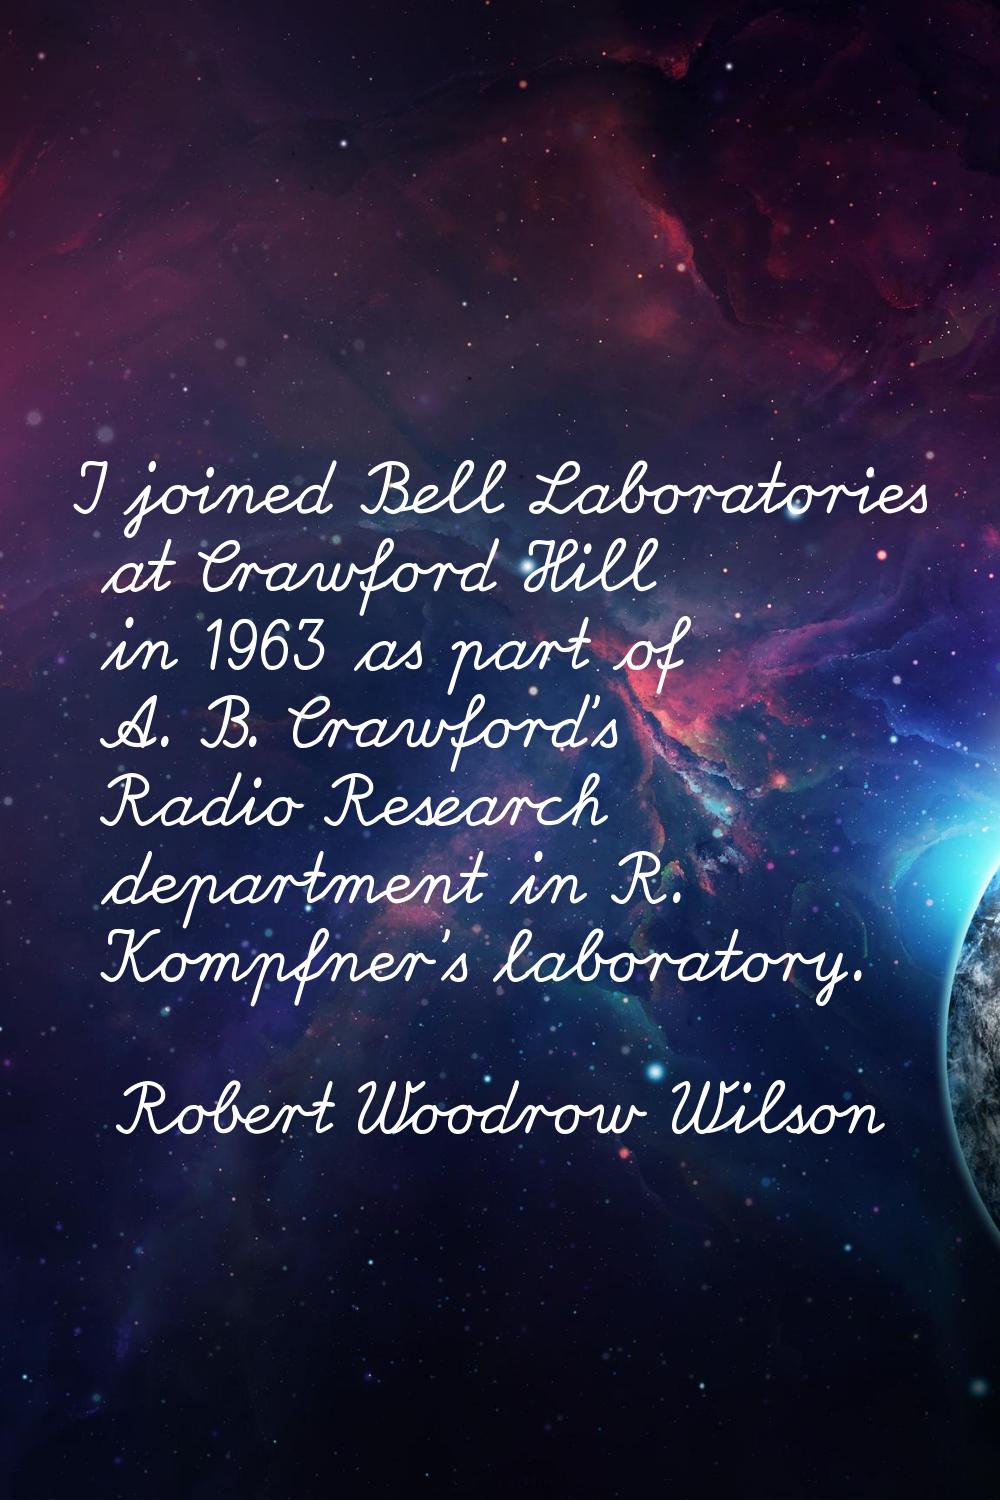 I joined Bell Laboratories at Crawford Hill in 1963 as part of A. B. Crawford's Radio Research depa